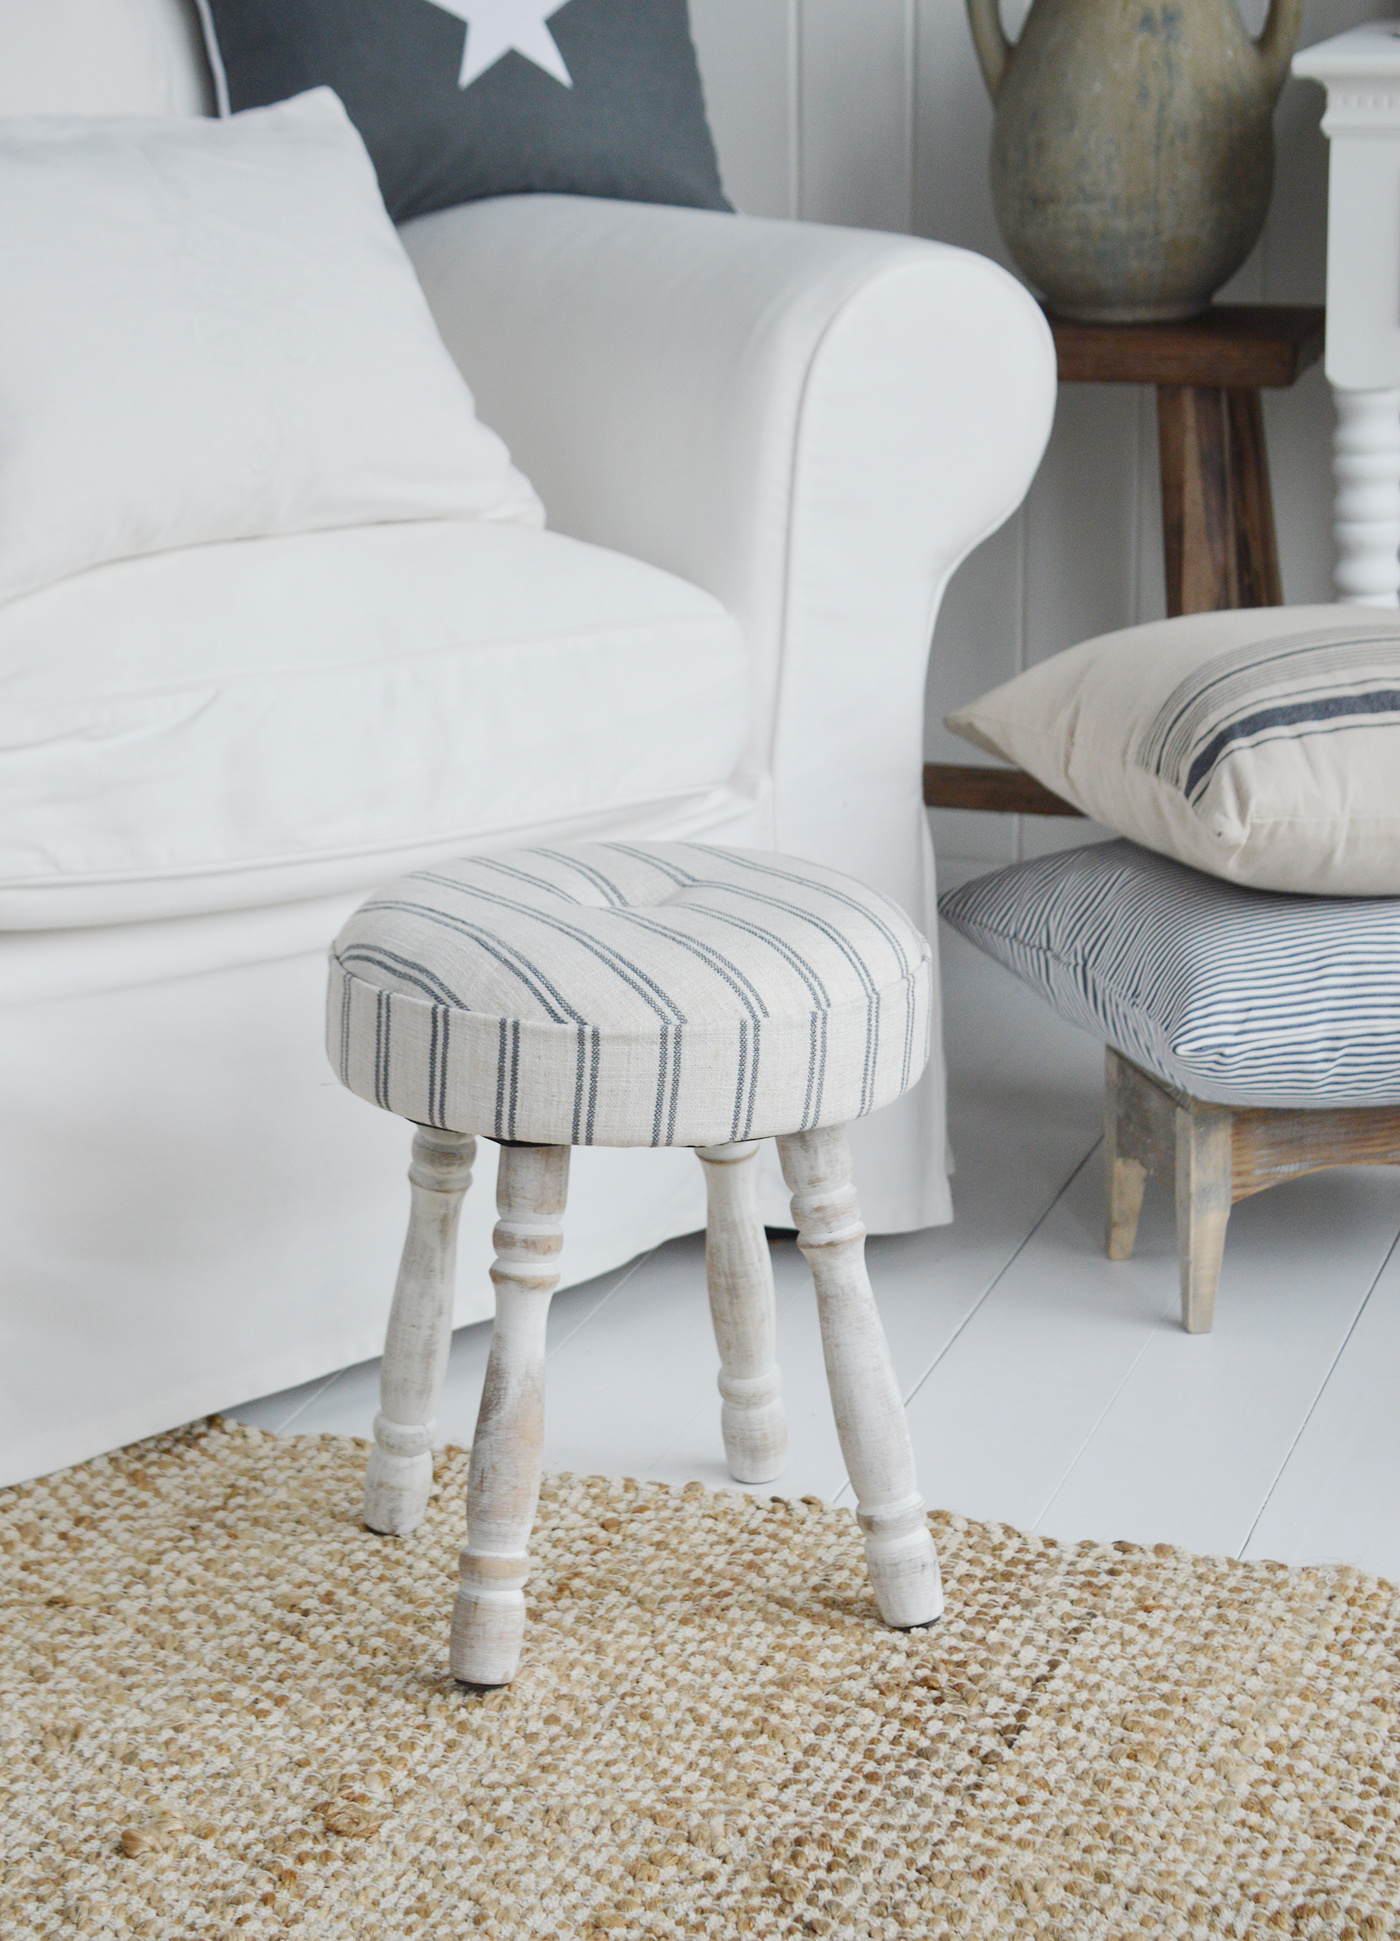 Long Island Small Stool Footstool - The White Lighthouse Furniture</title>
<meta name=